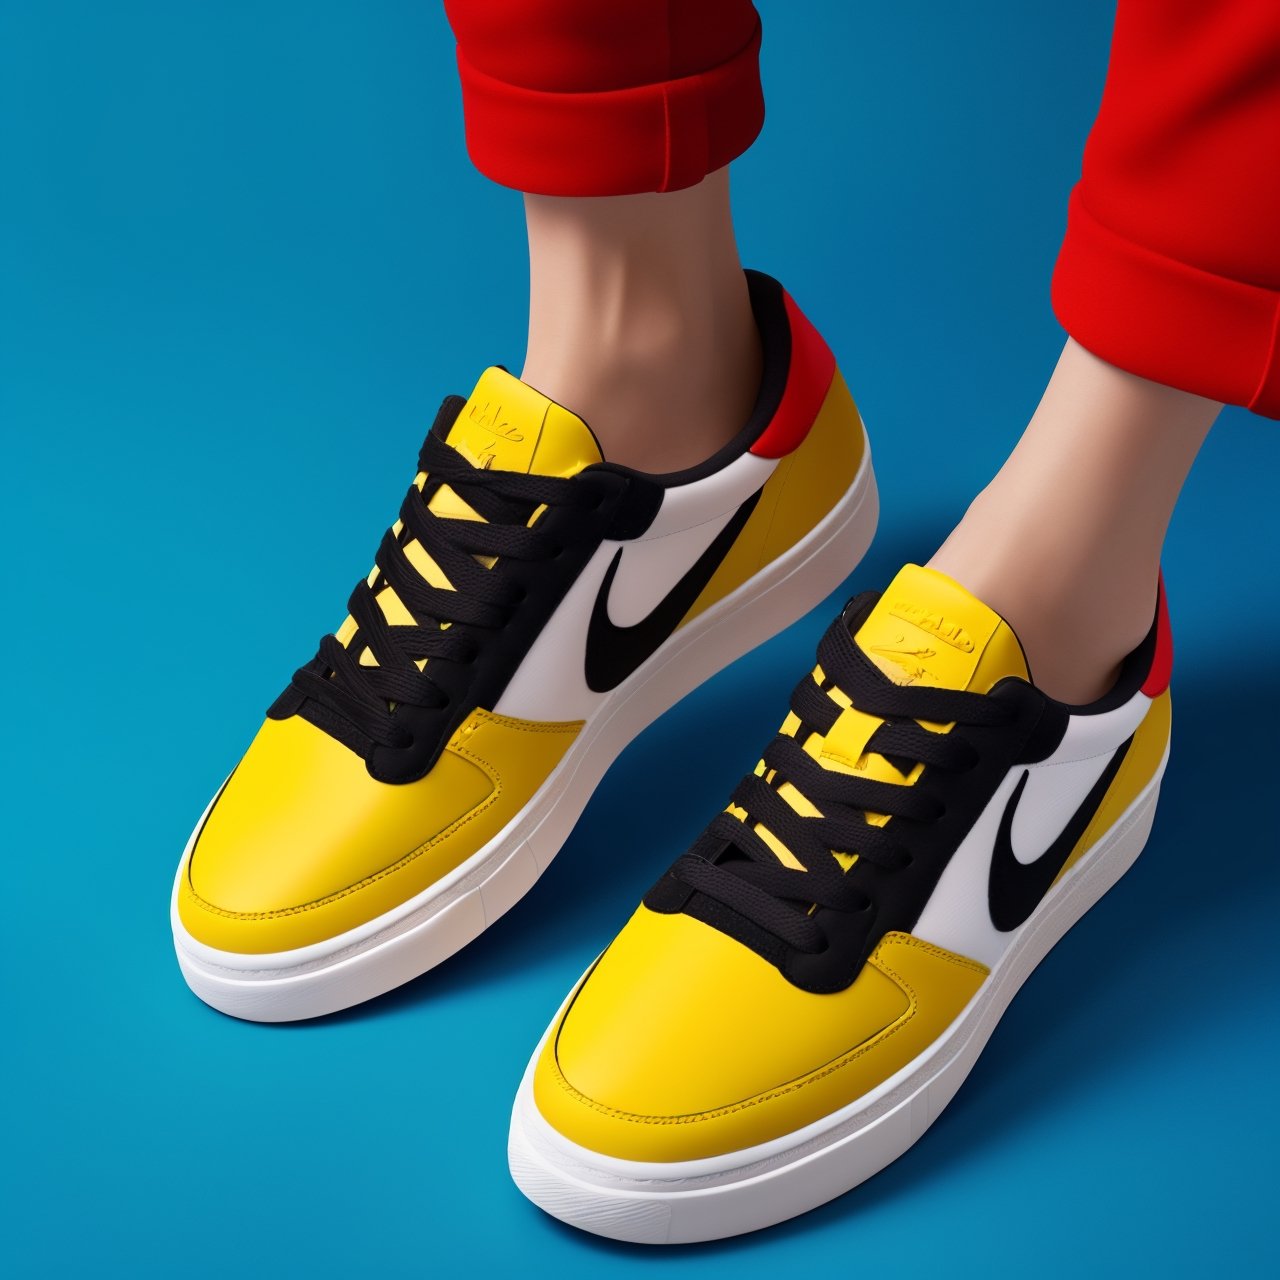 (Create a concept design through studio photography),(Showcasing sneakers with a unique and eye-catching design), (((inspired by Vietnam flag))),(in a commercial style),(placed against a bold blue background),(Render it in a cinematic, photorealistic manner),(ensuring it's available in an impressive 8K resolution).